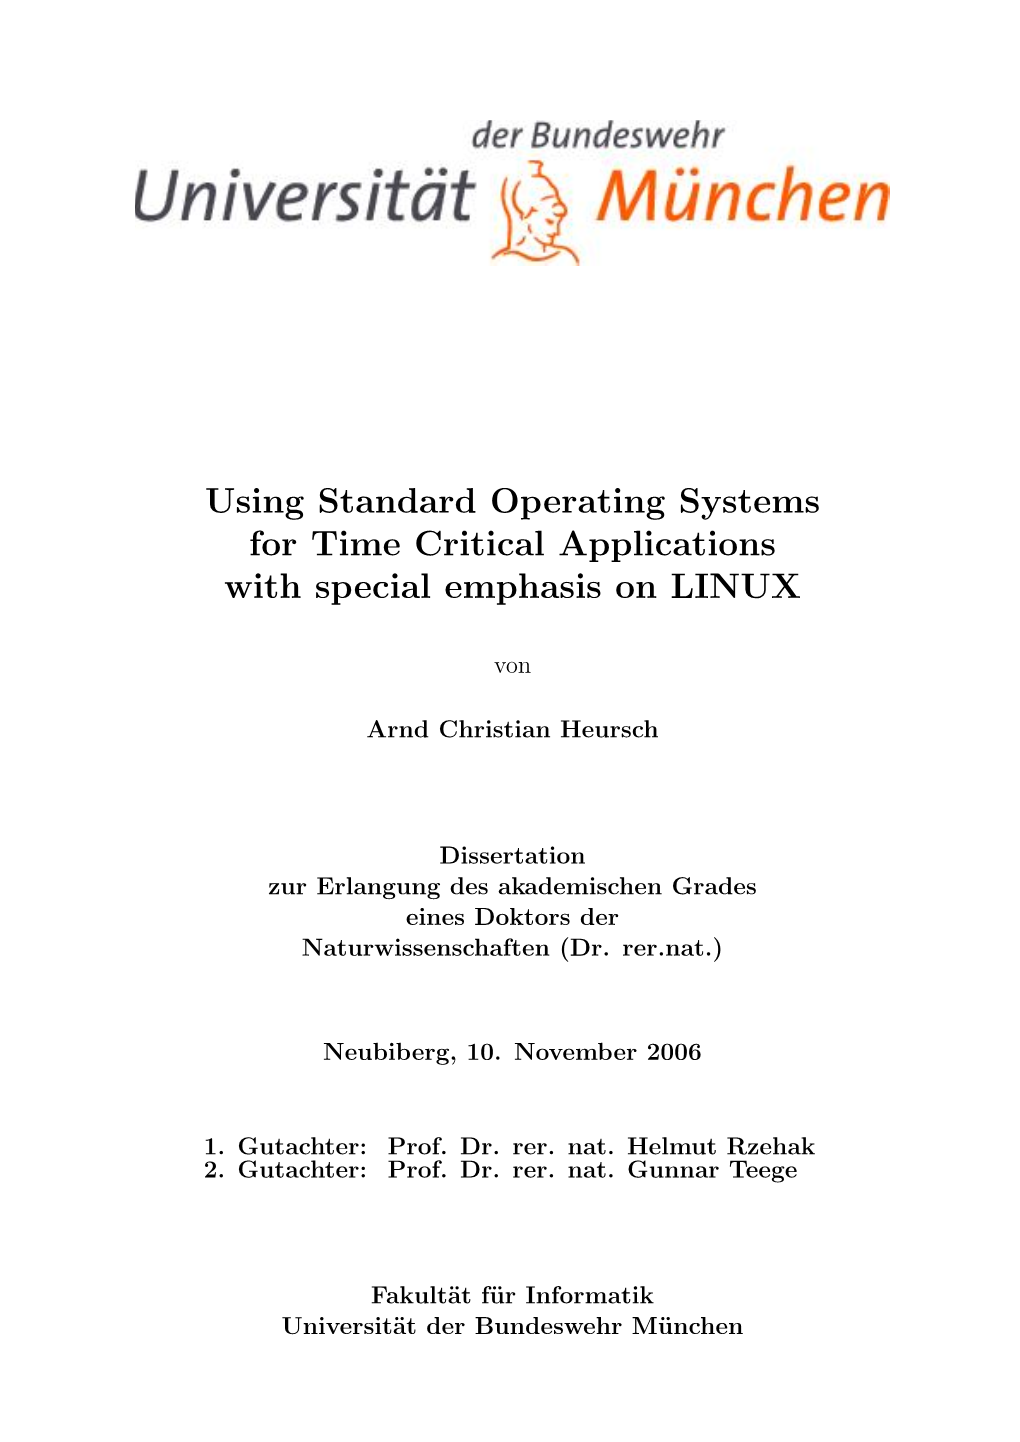 Using Standard Operating Systems for Time Critical Applications with Special Emphasis on LINUX